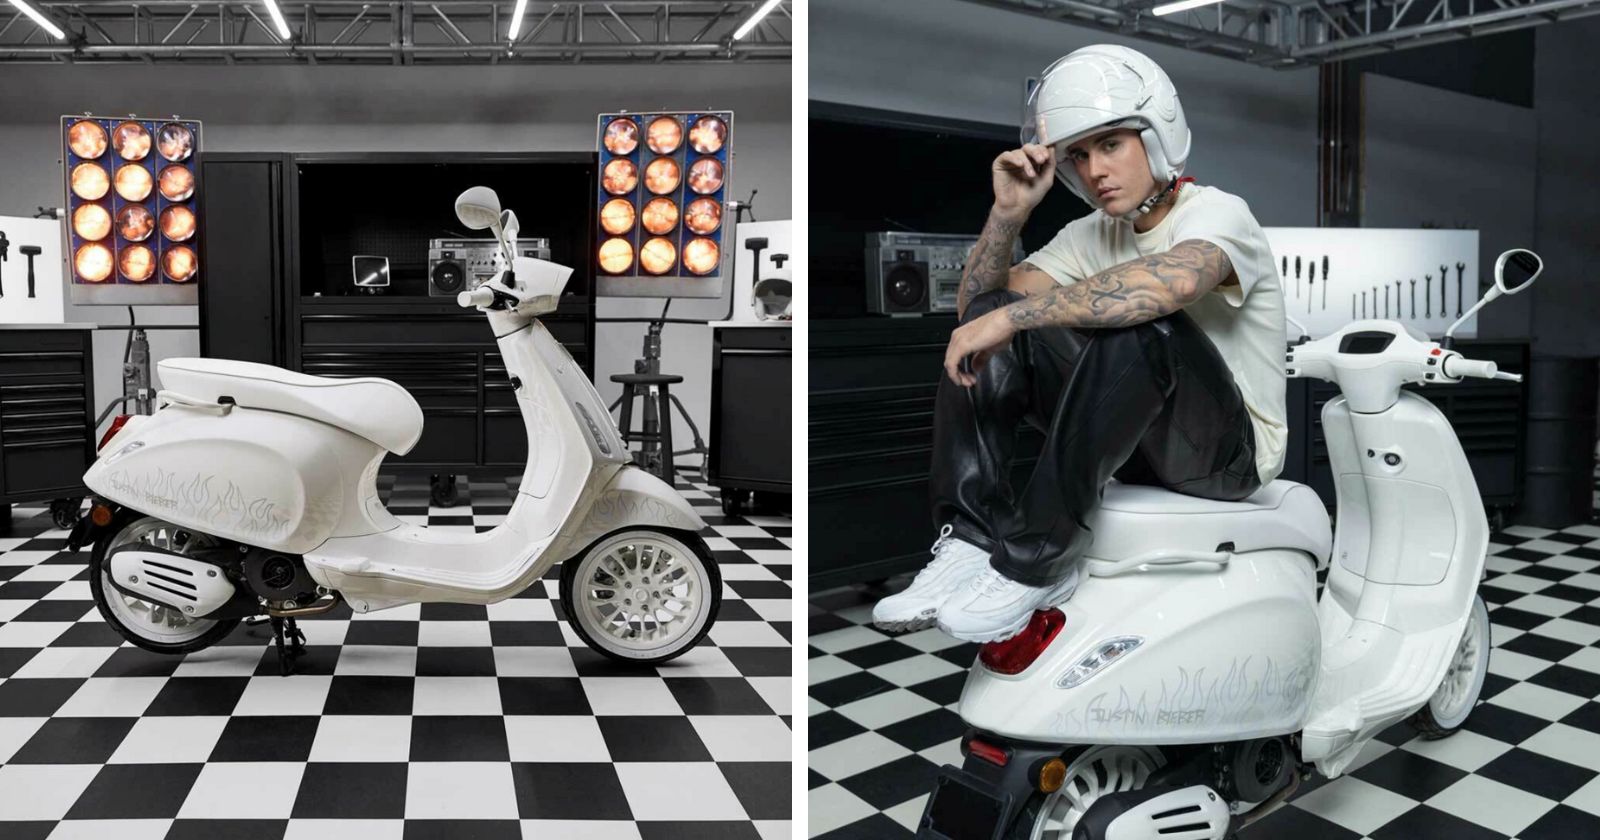 Vespa Justin Bieber Edition 150cc Scooter Launch Price Rs 6.46 Lakh